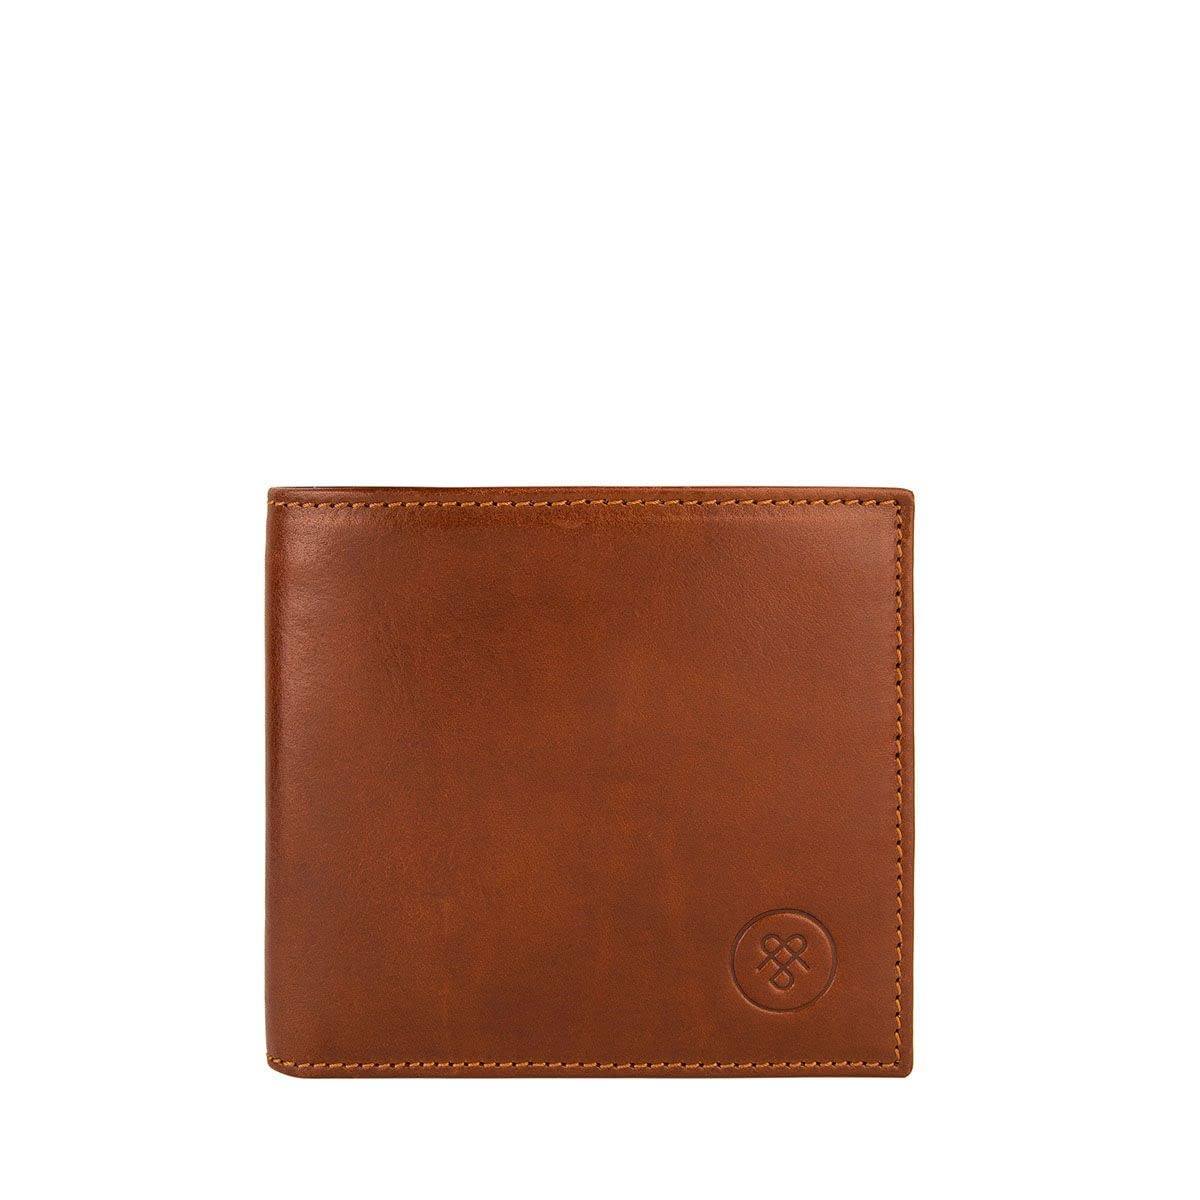 Maxwell Scott - Personalized Luxury Leather RFID Billfold Wallet for Men - The Vittore RFID - Chestnut Tan